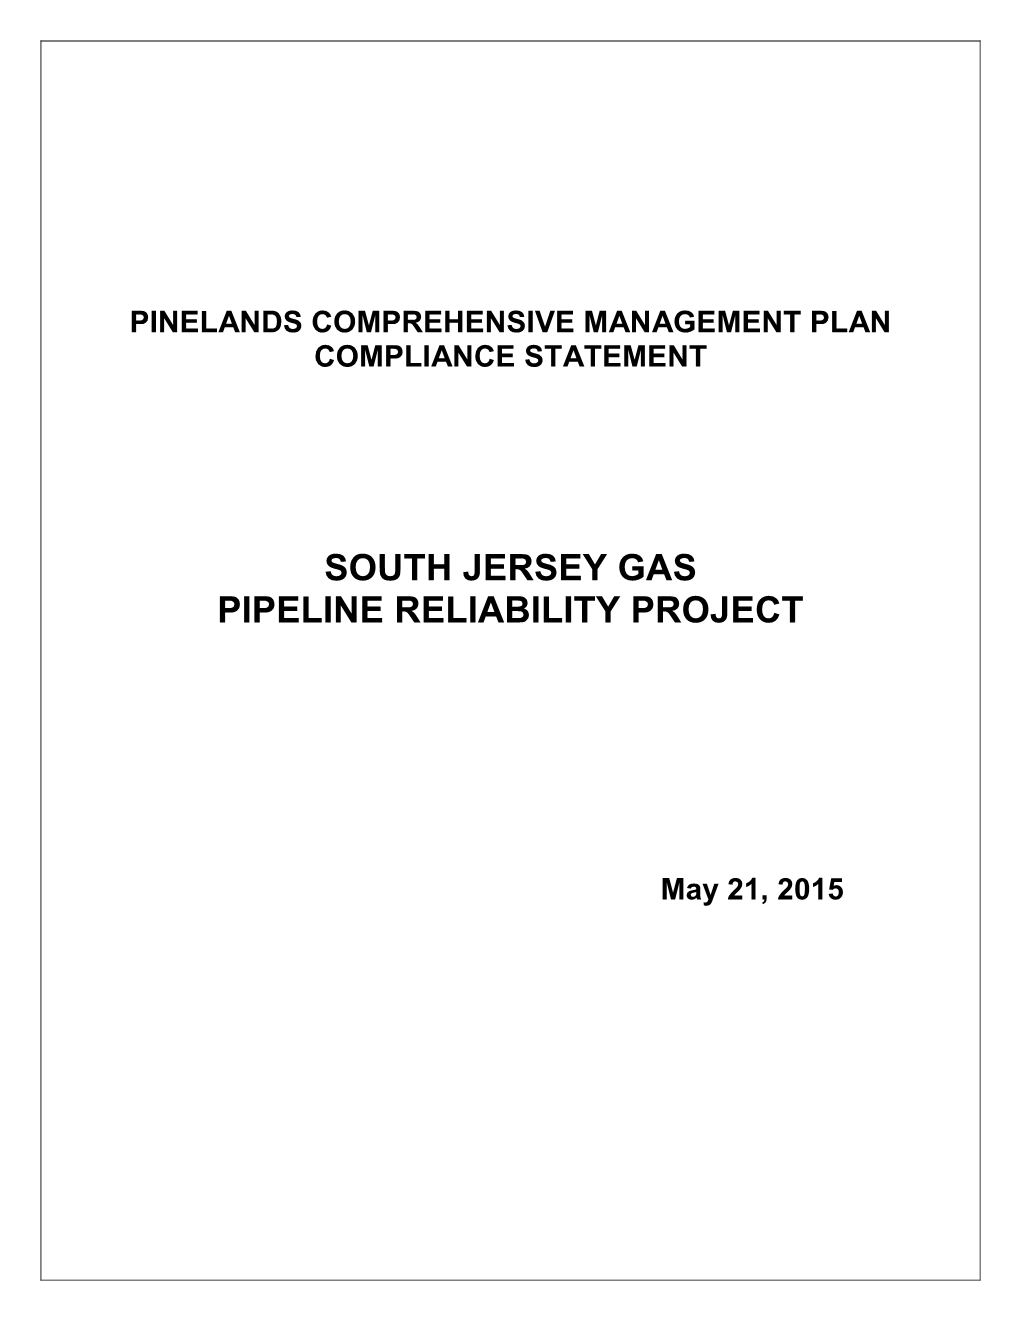 South Jersey Gas Pipeline Reliability Project